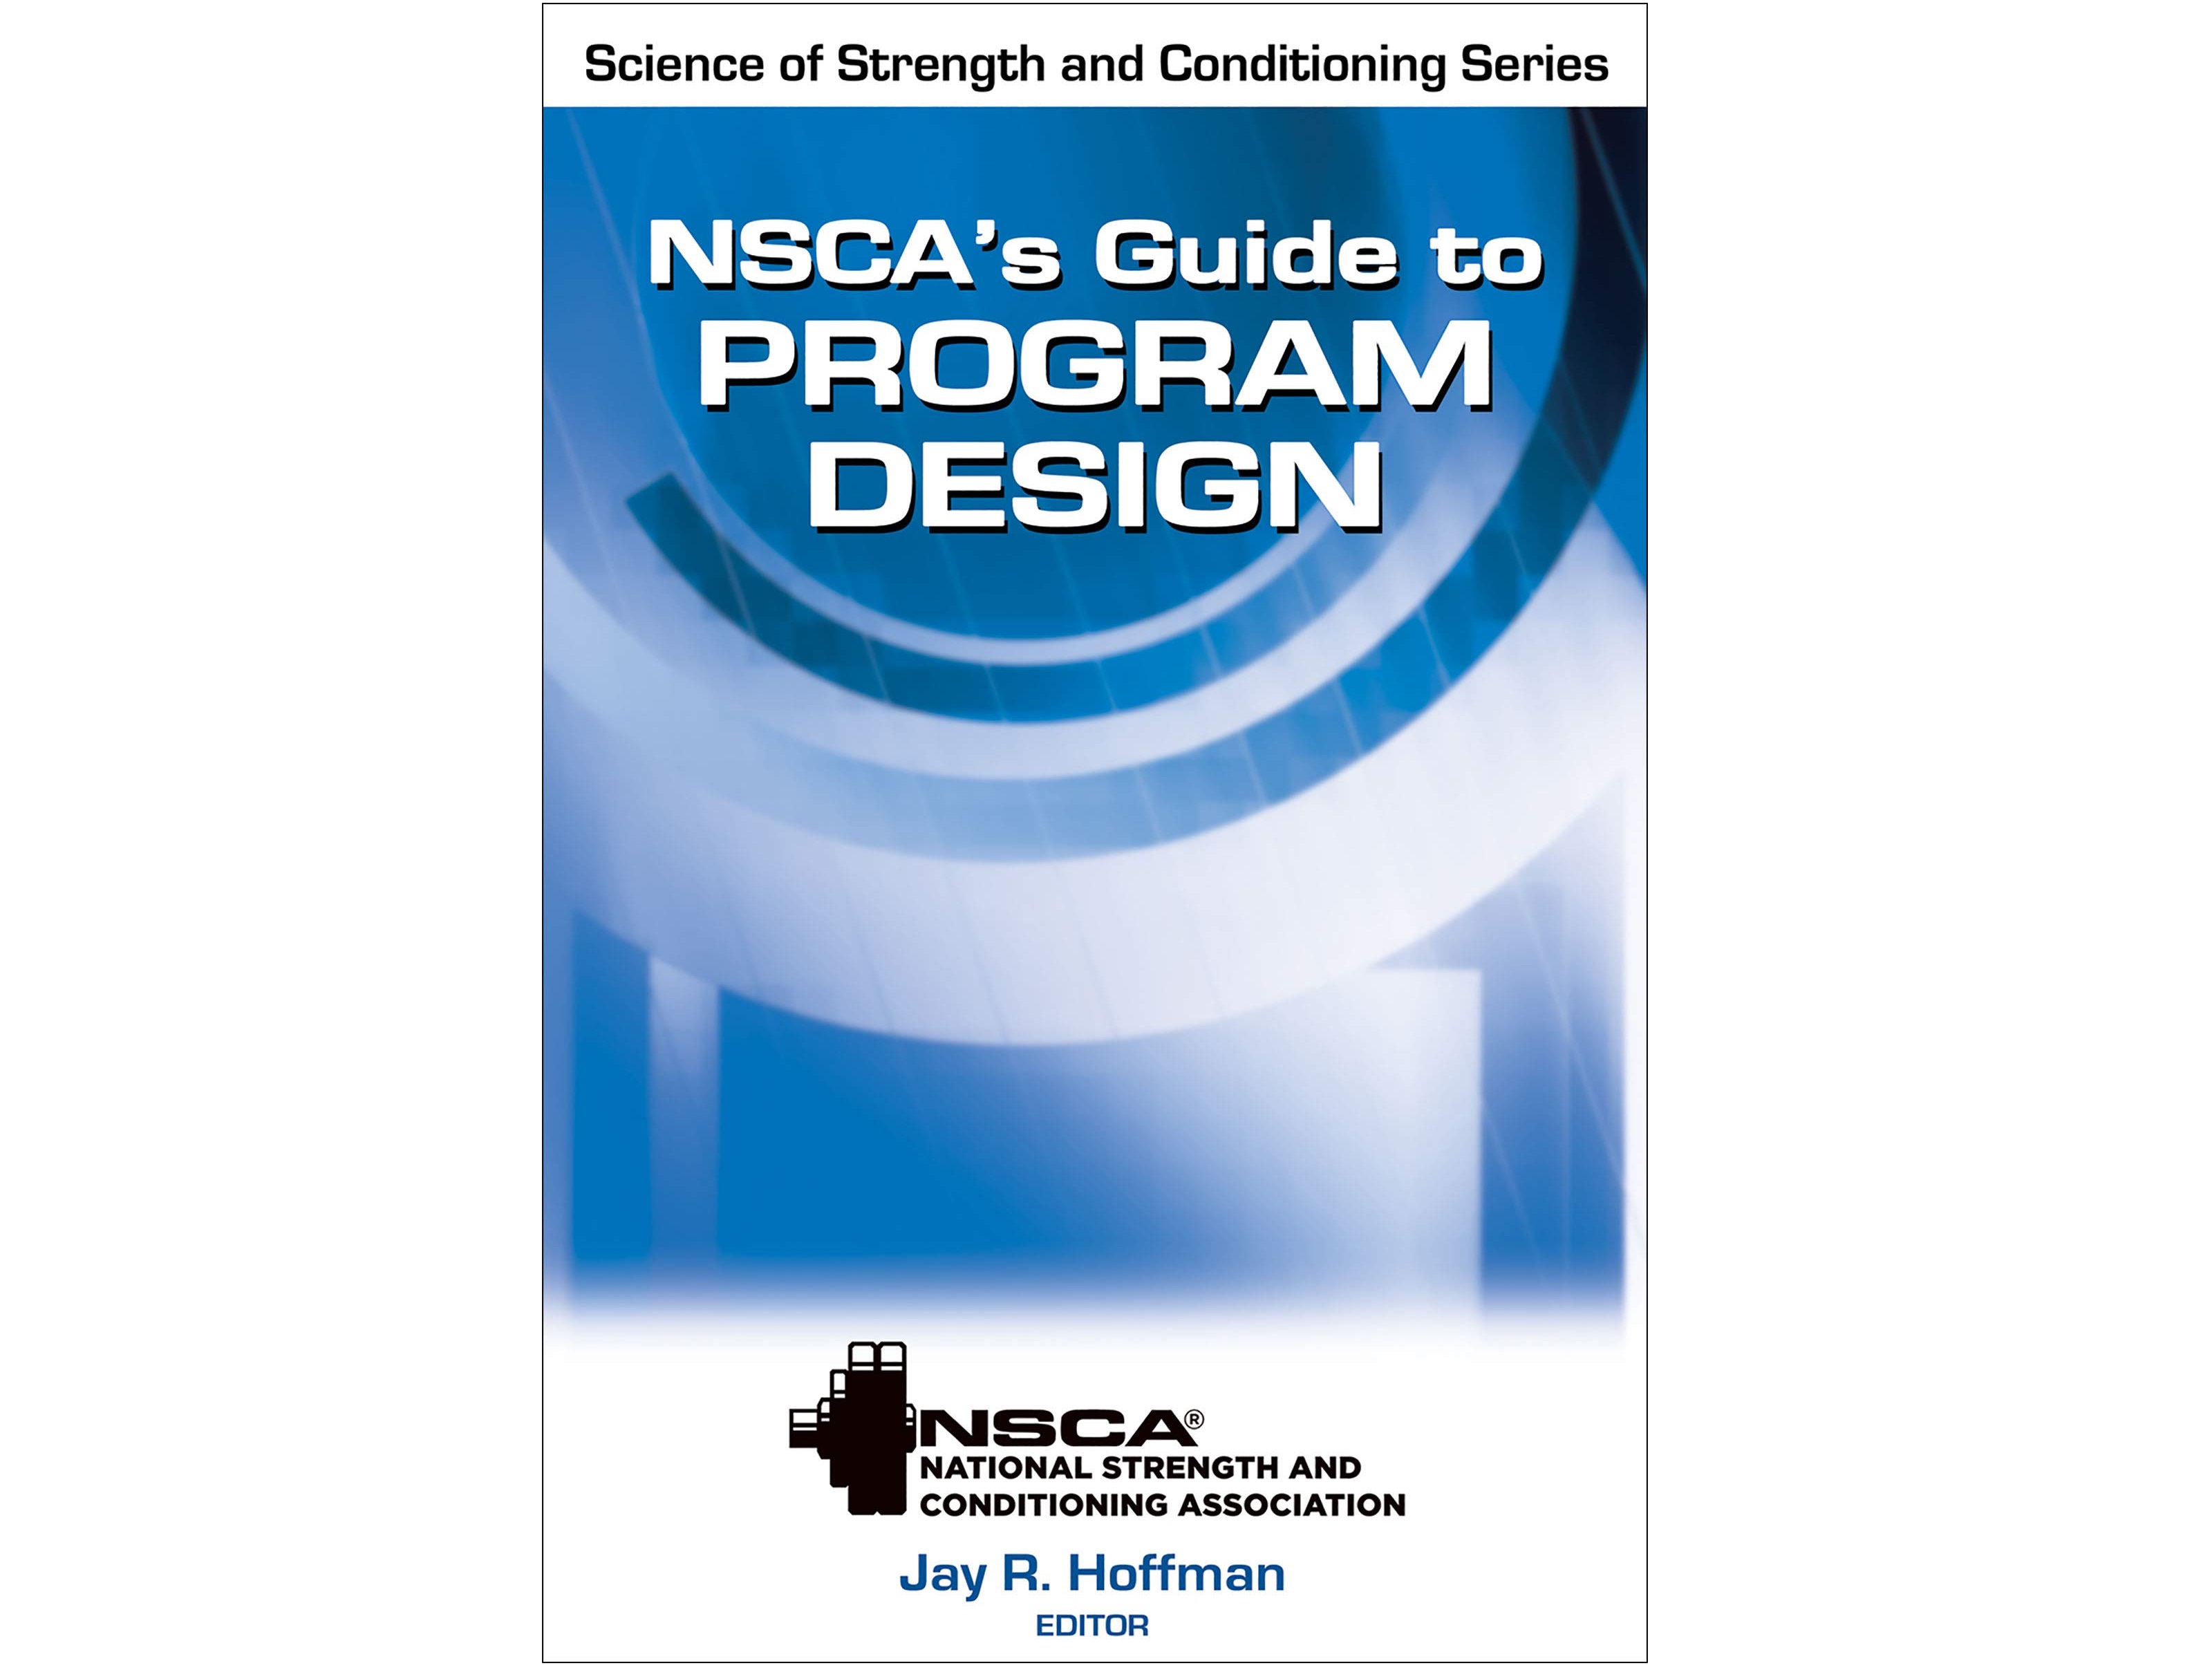 book list photo of NSCA Guide to Program Design by the NSCA